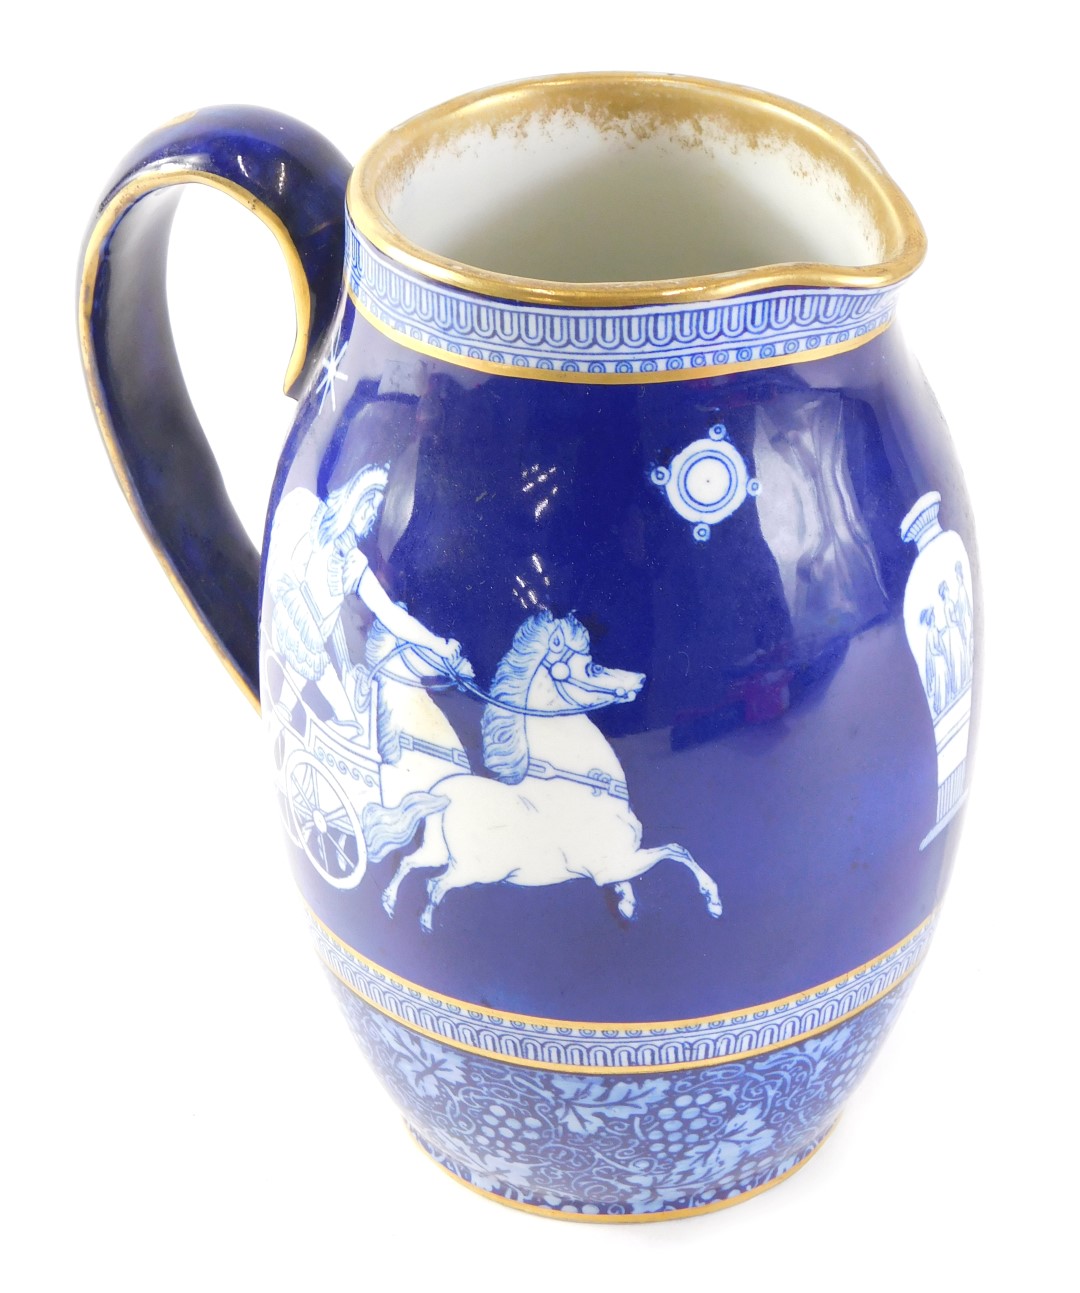 A Royal Doulton water jug, with a royal blue ground and gilded border, depicting Grecian warriors on